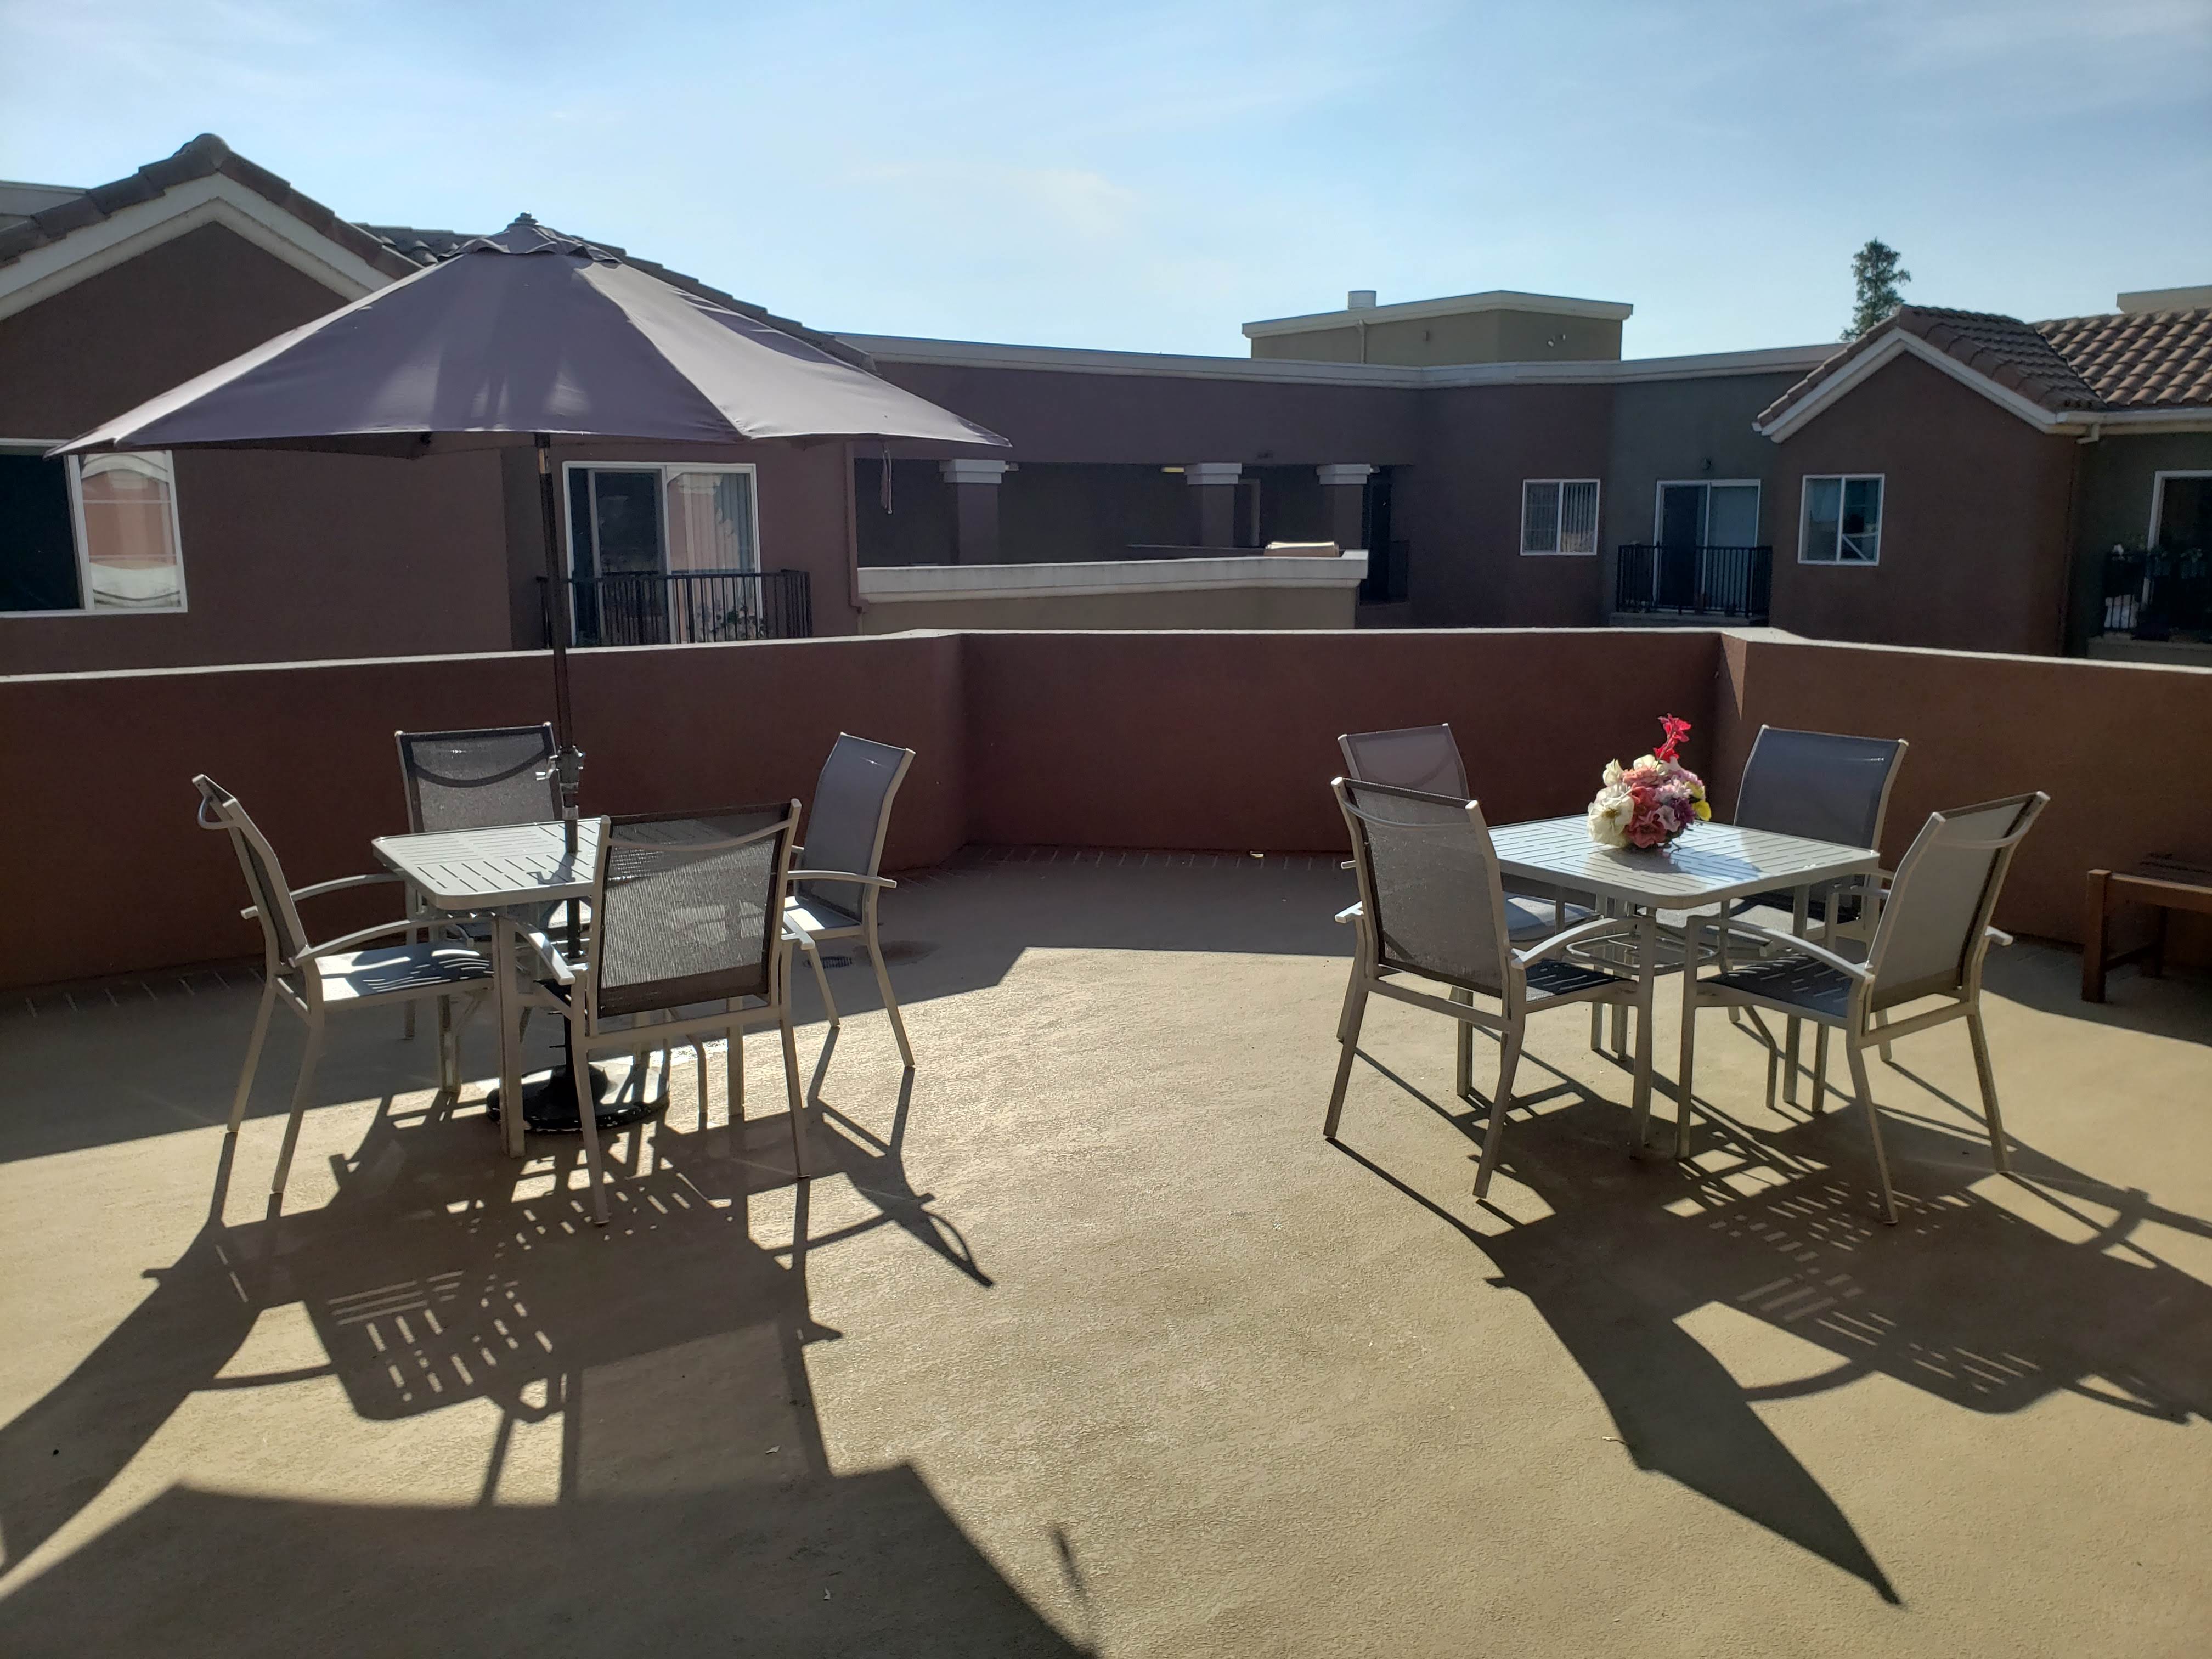 Image of vintage crossing senior apartments upper level community patio. Patio table and chairs. one patio set has an umbrella for additional shading. small decrative flower on table